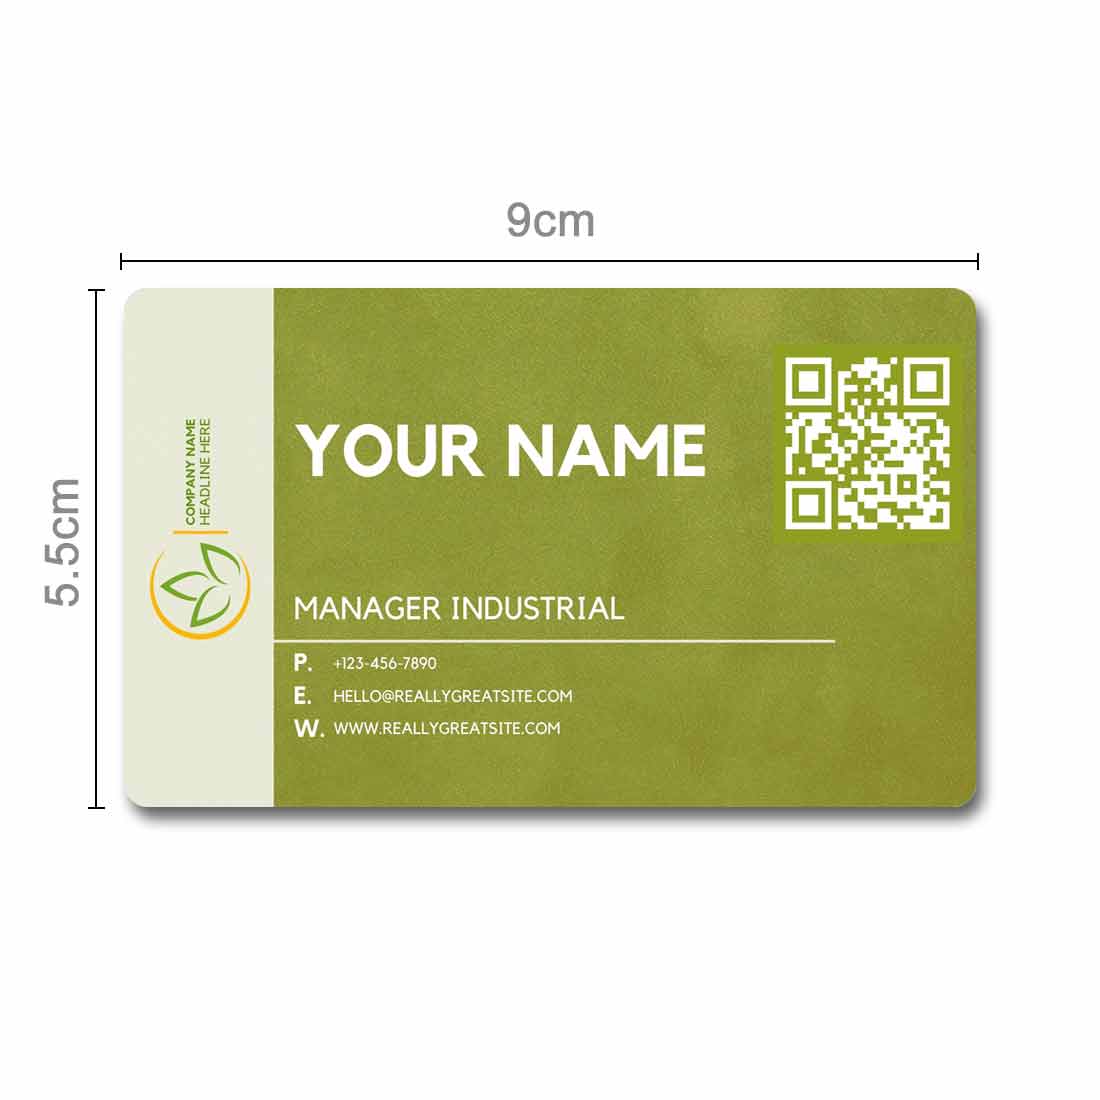 business card design with qr code